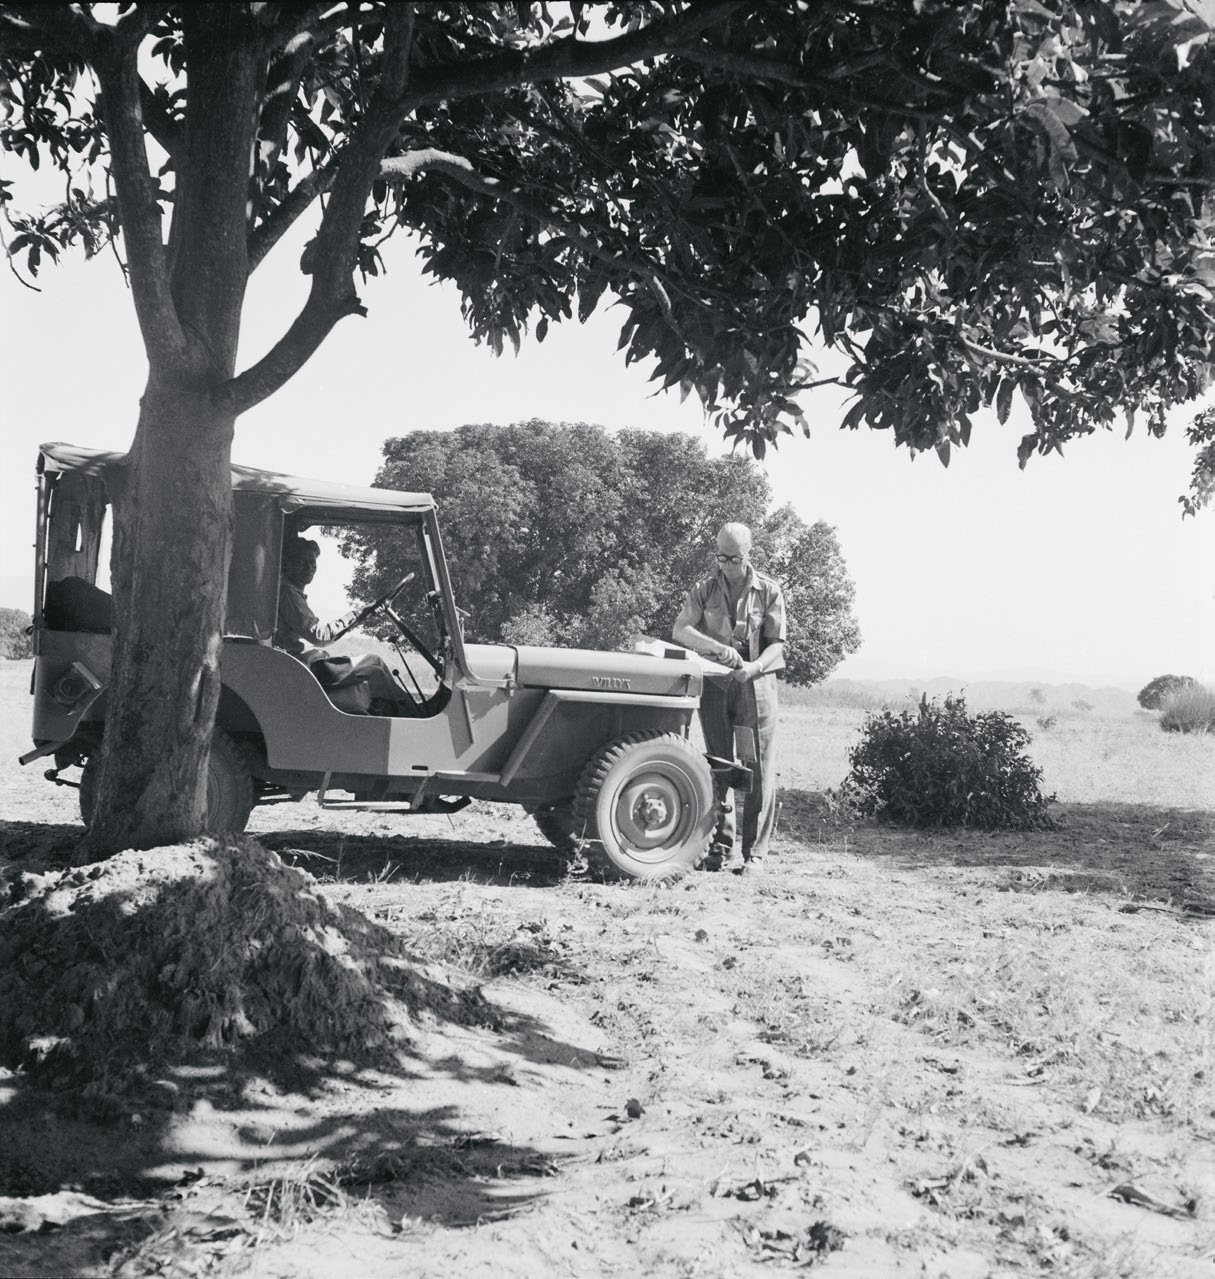 Chandigarh area, Le Corbusier examines a map leaning on the hood of the jeep used to explore the region.